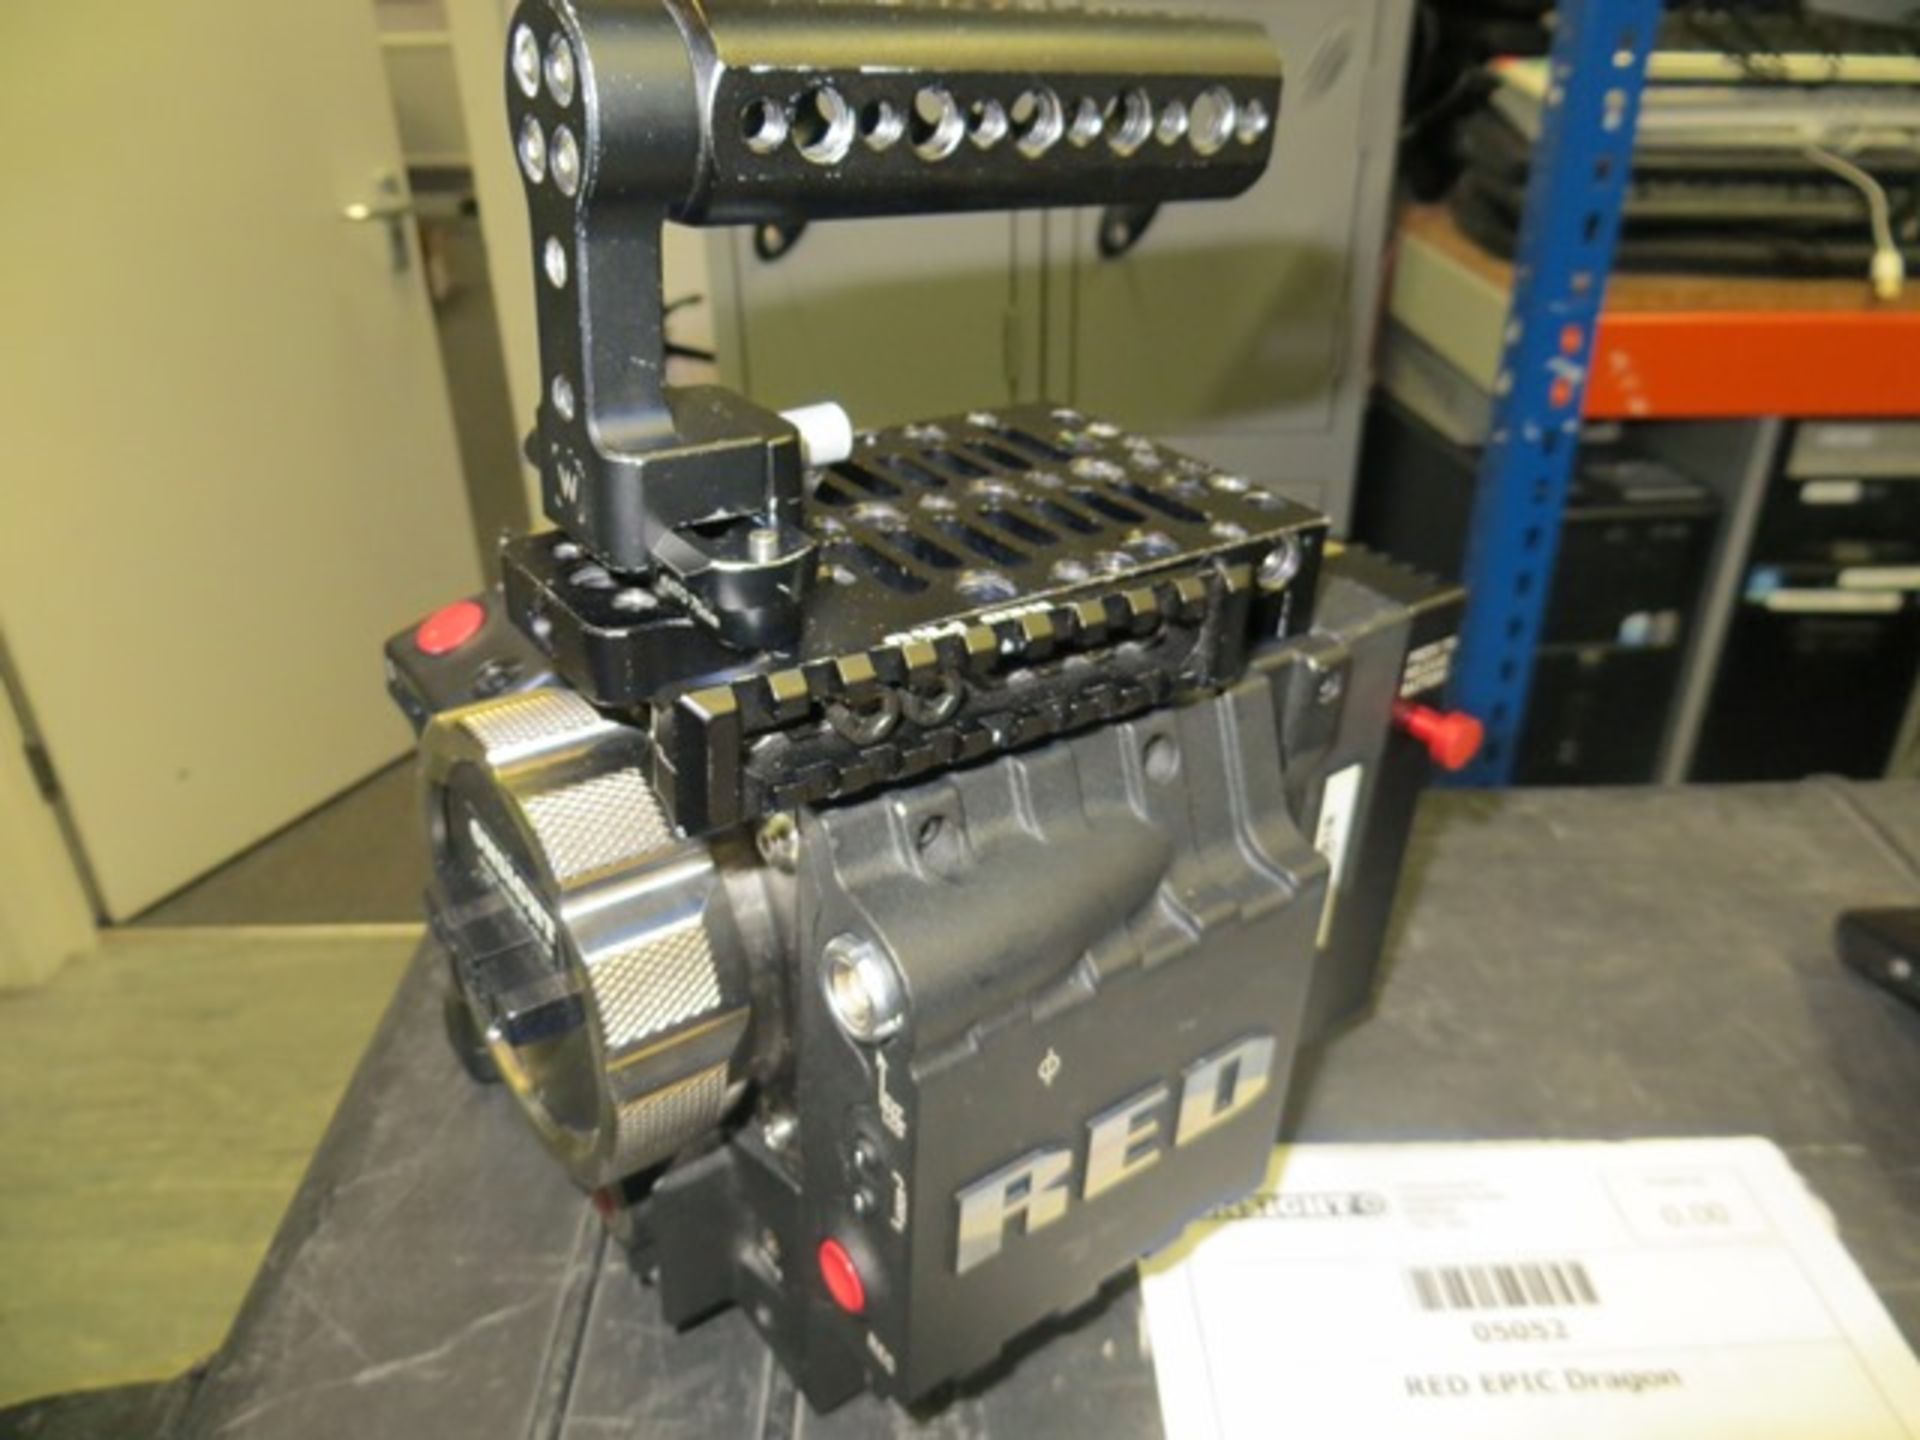 Red Epic Dragon Upgrade 6K Camera 35mm s/n 00523 set up for 19mm c/w attachments including Plus - Image 2 of 5